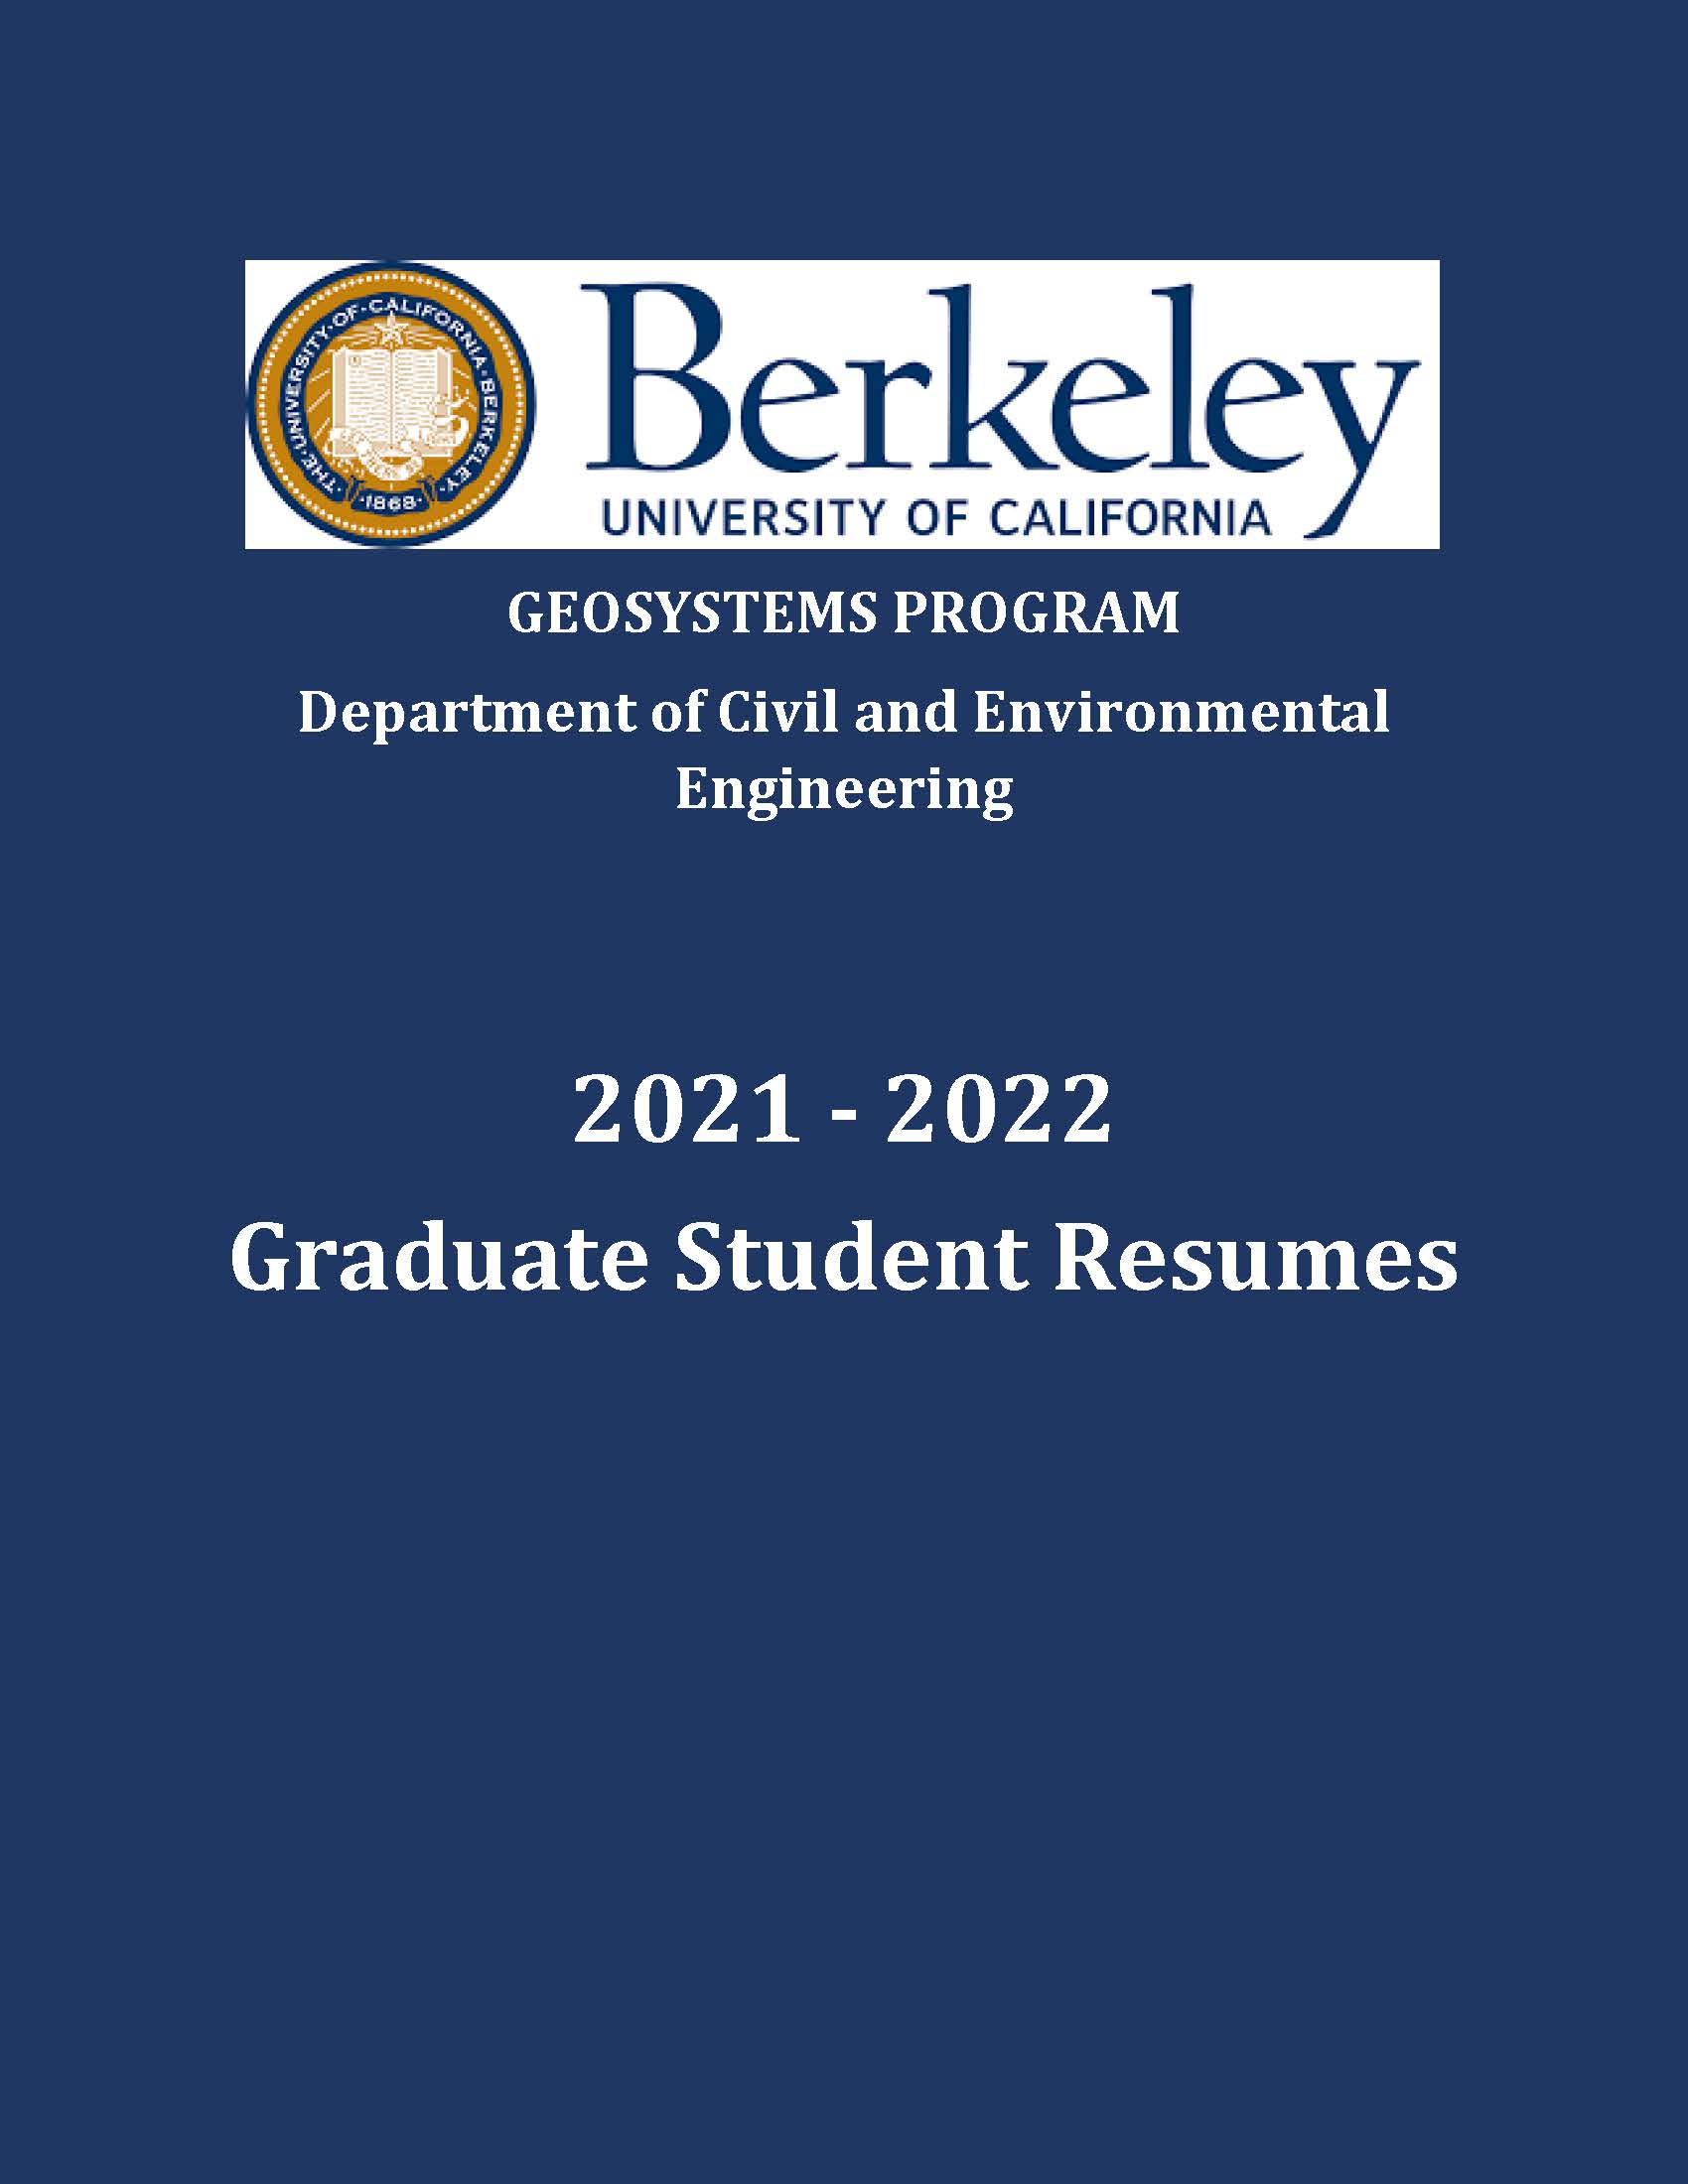 Booklet with Graduate Student Resumes Distributed to Companies